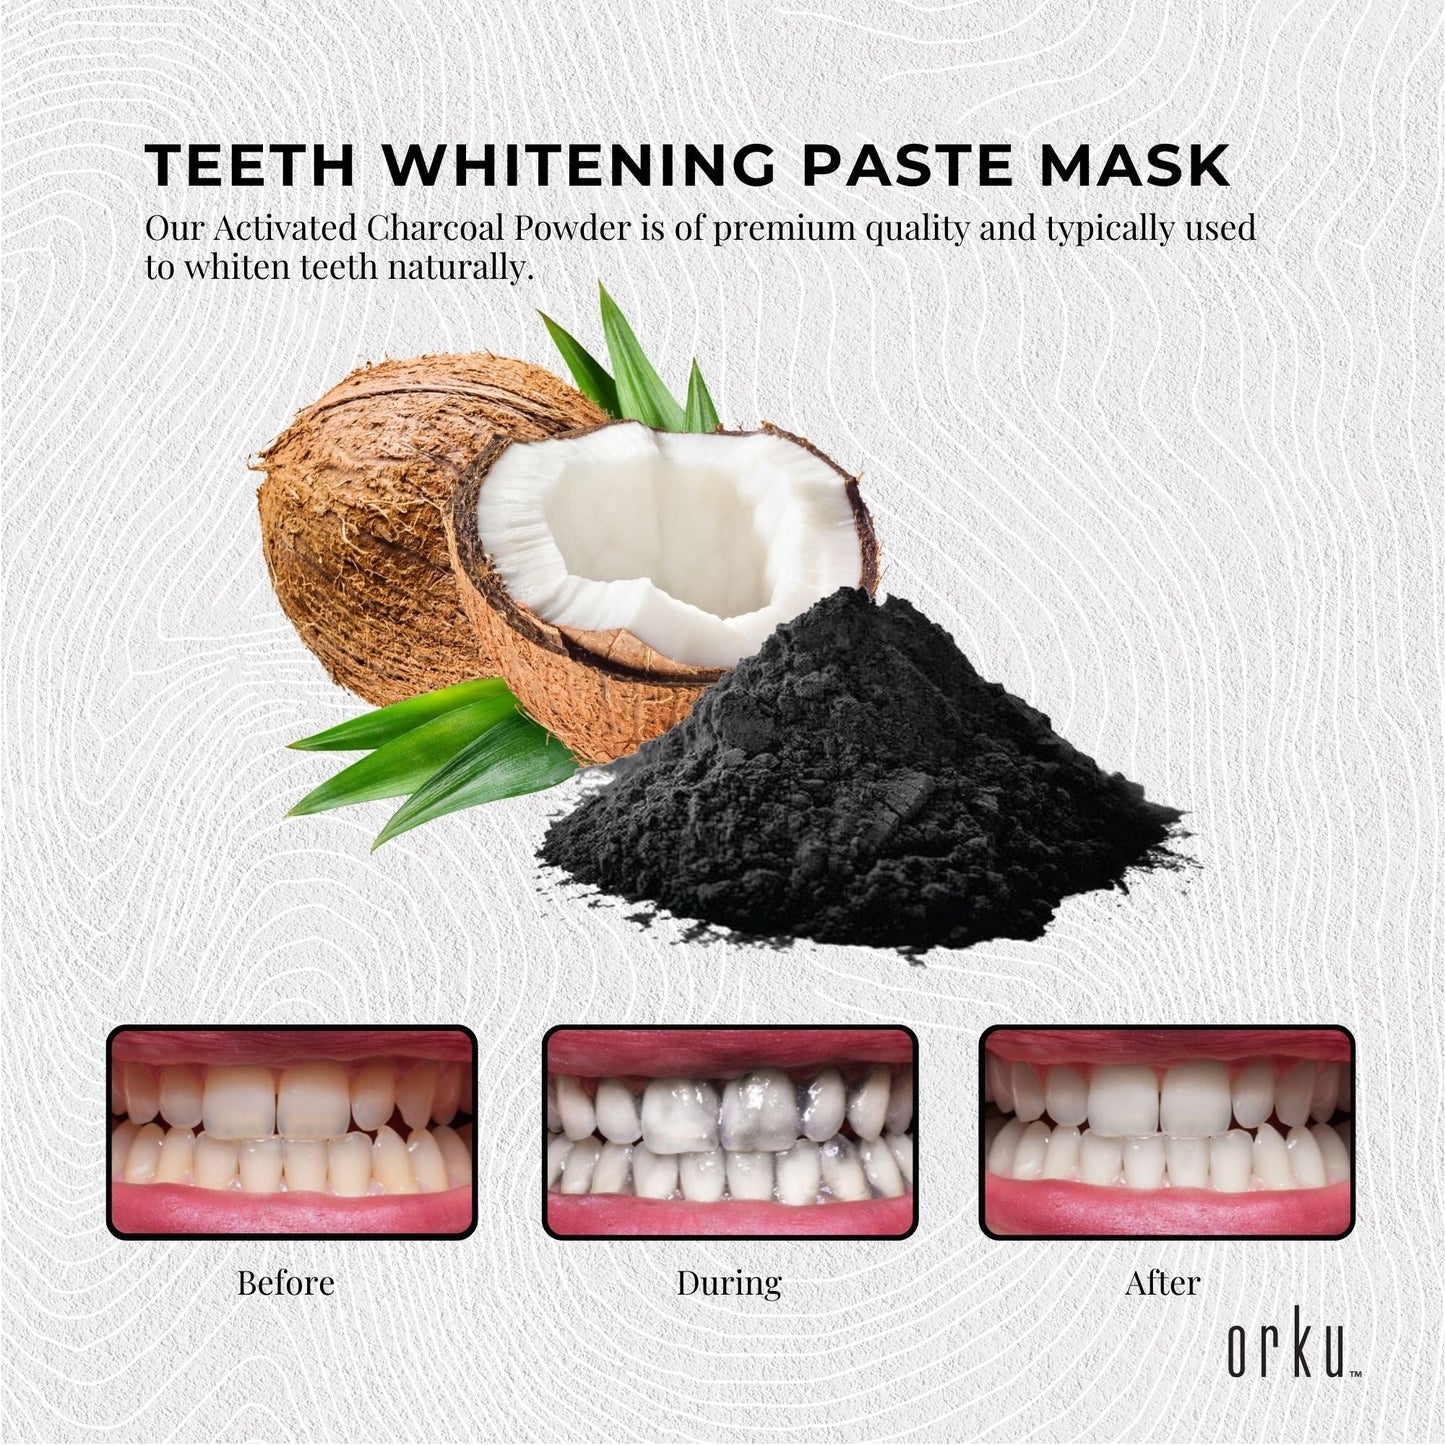 20Kg Activated Carbon Powder Coconut Charcoal - Teeth Whitening + Skin